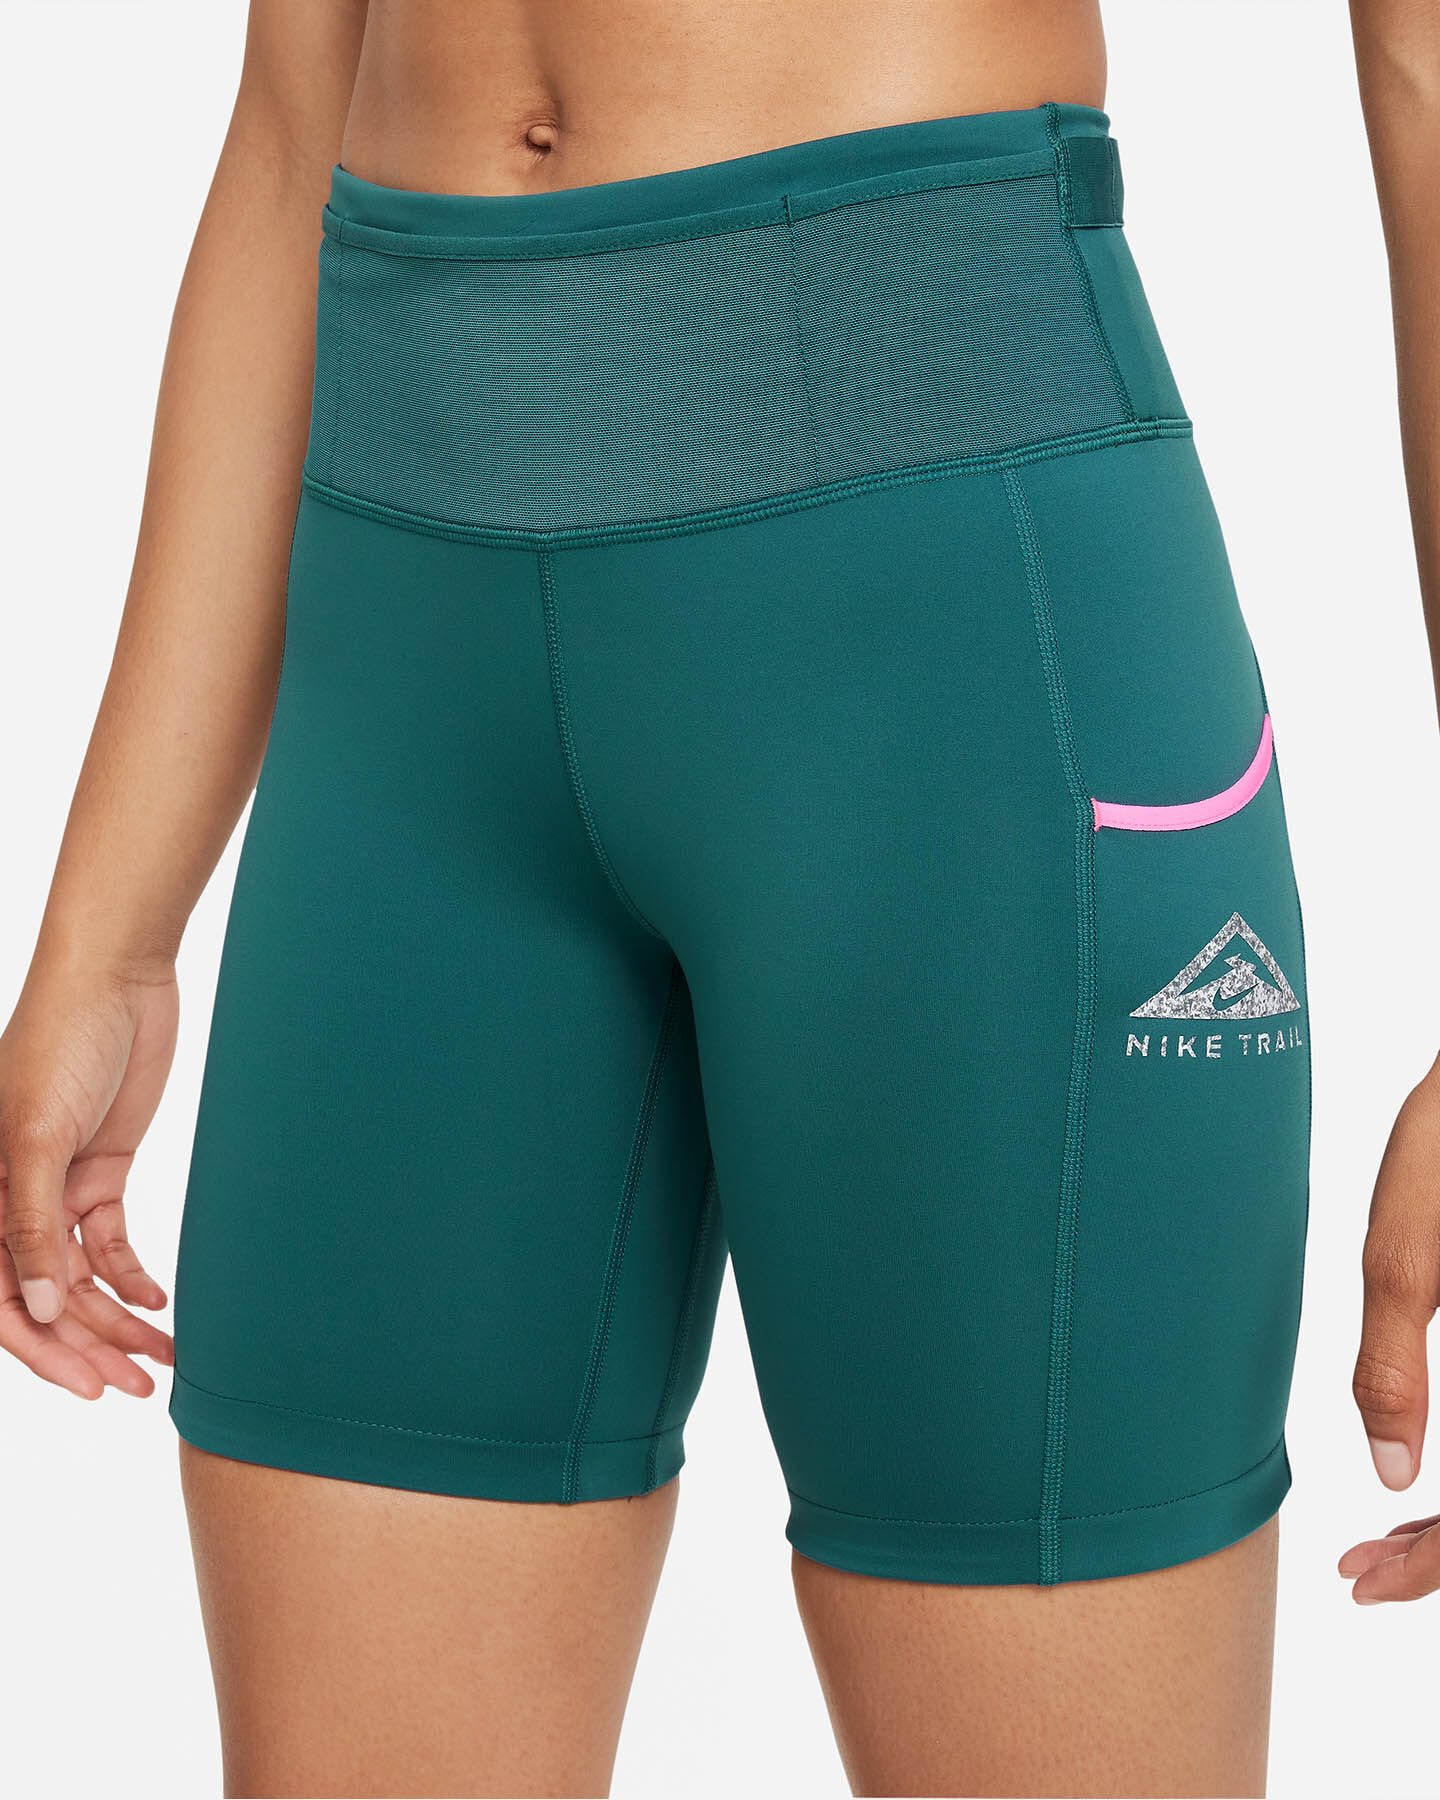  Short running NIKE TRAIL EPIC LUXE W S5320705|393|XS scatto 1